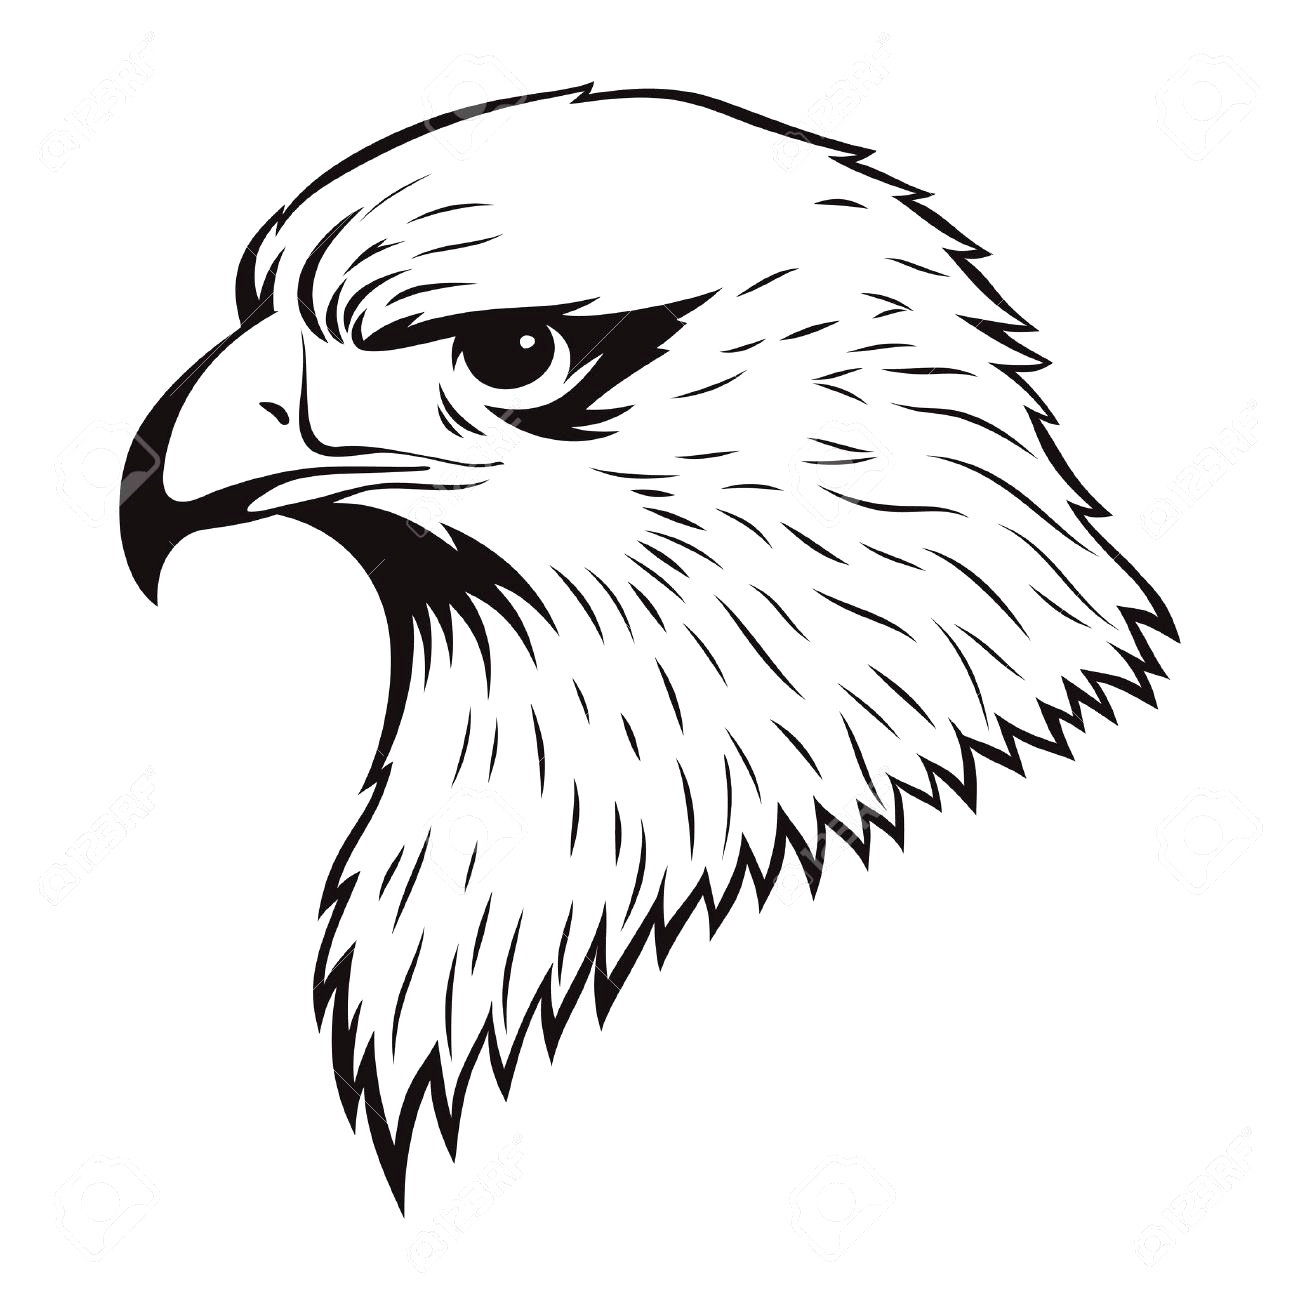 Electric. simple eagle drawings: How To Draw An Eagle Central